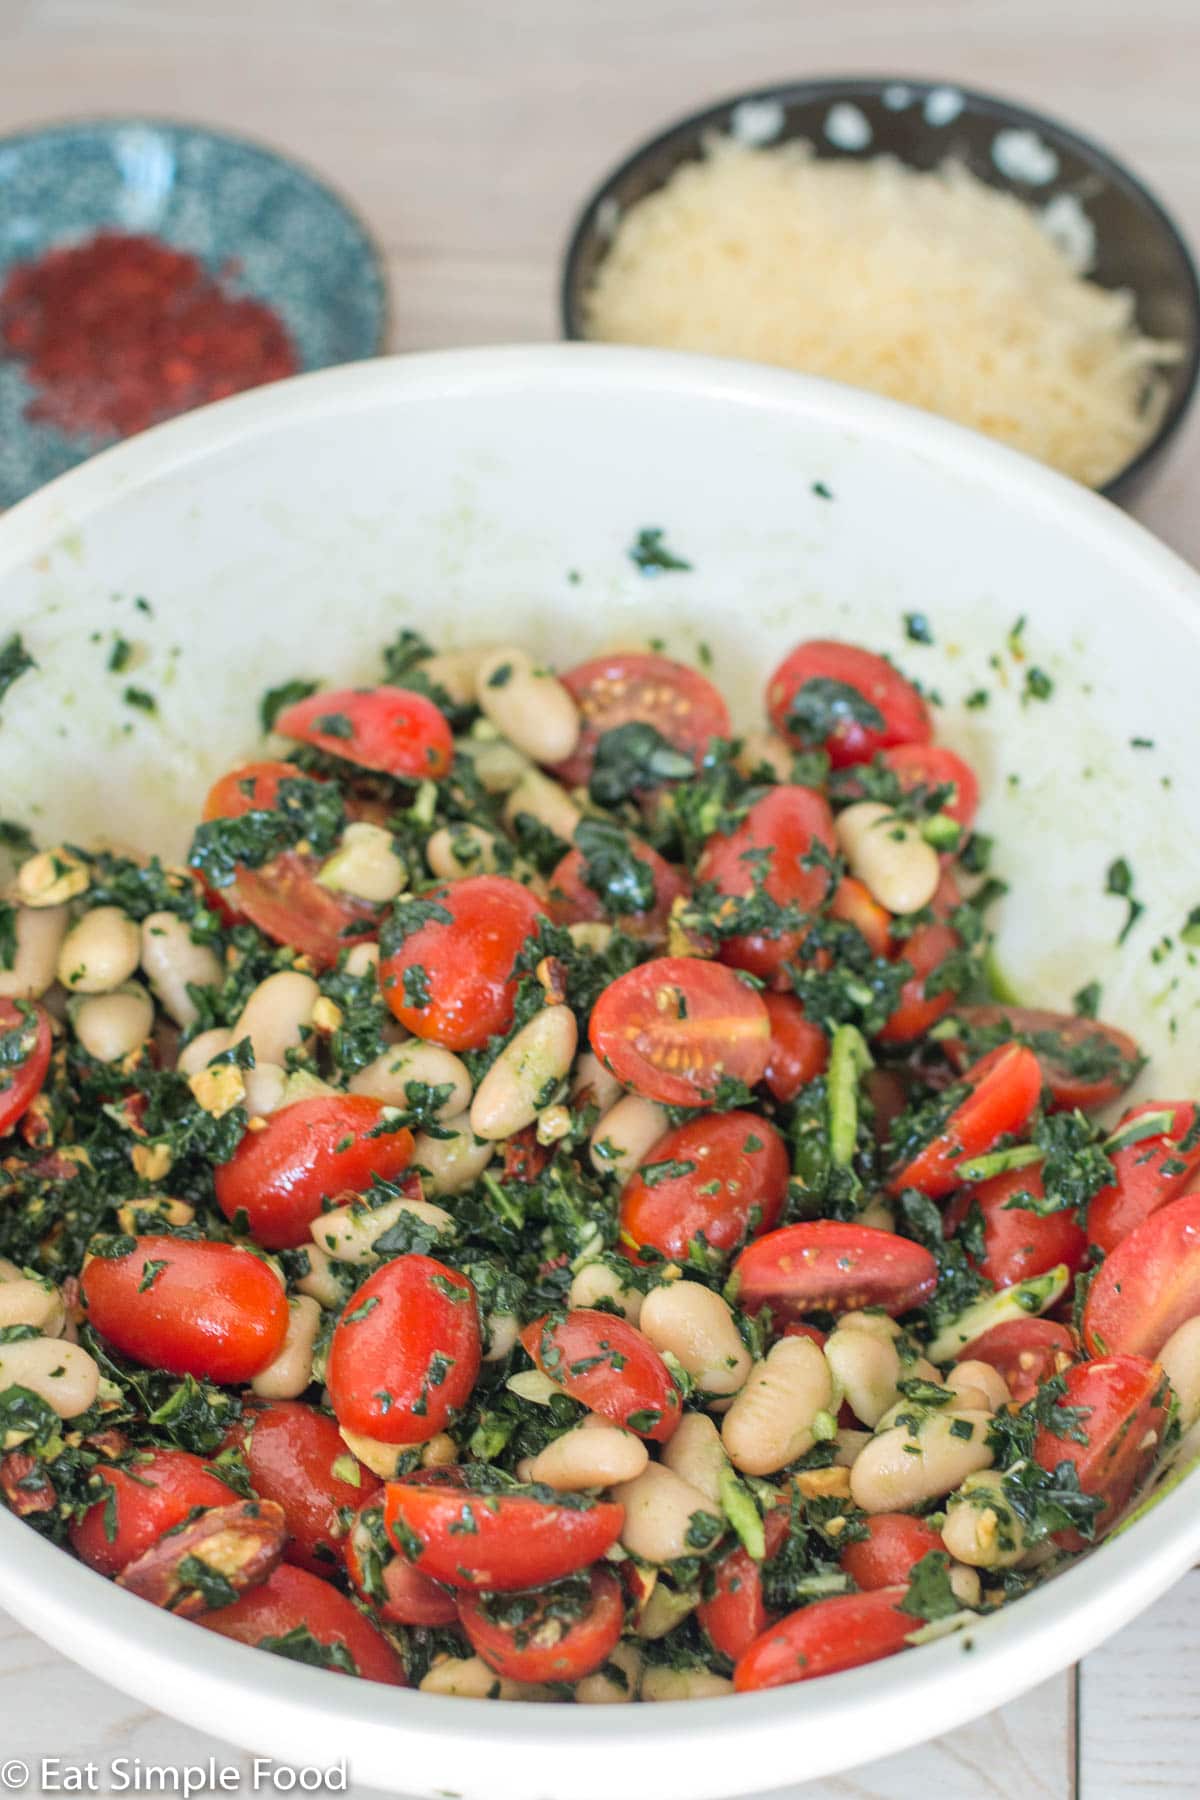 Side view of white beans and halved cherry tomatoes with Kale pesto in a white bowl. Bowl of chili flakes and grated Parmesan cheese in background.